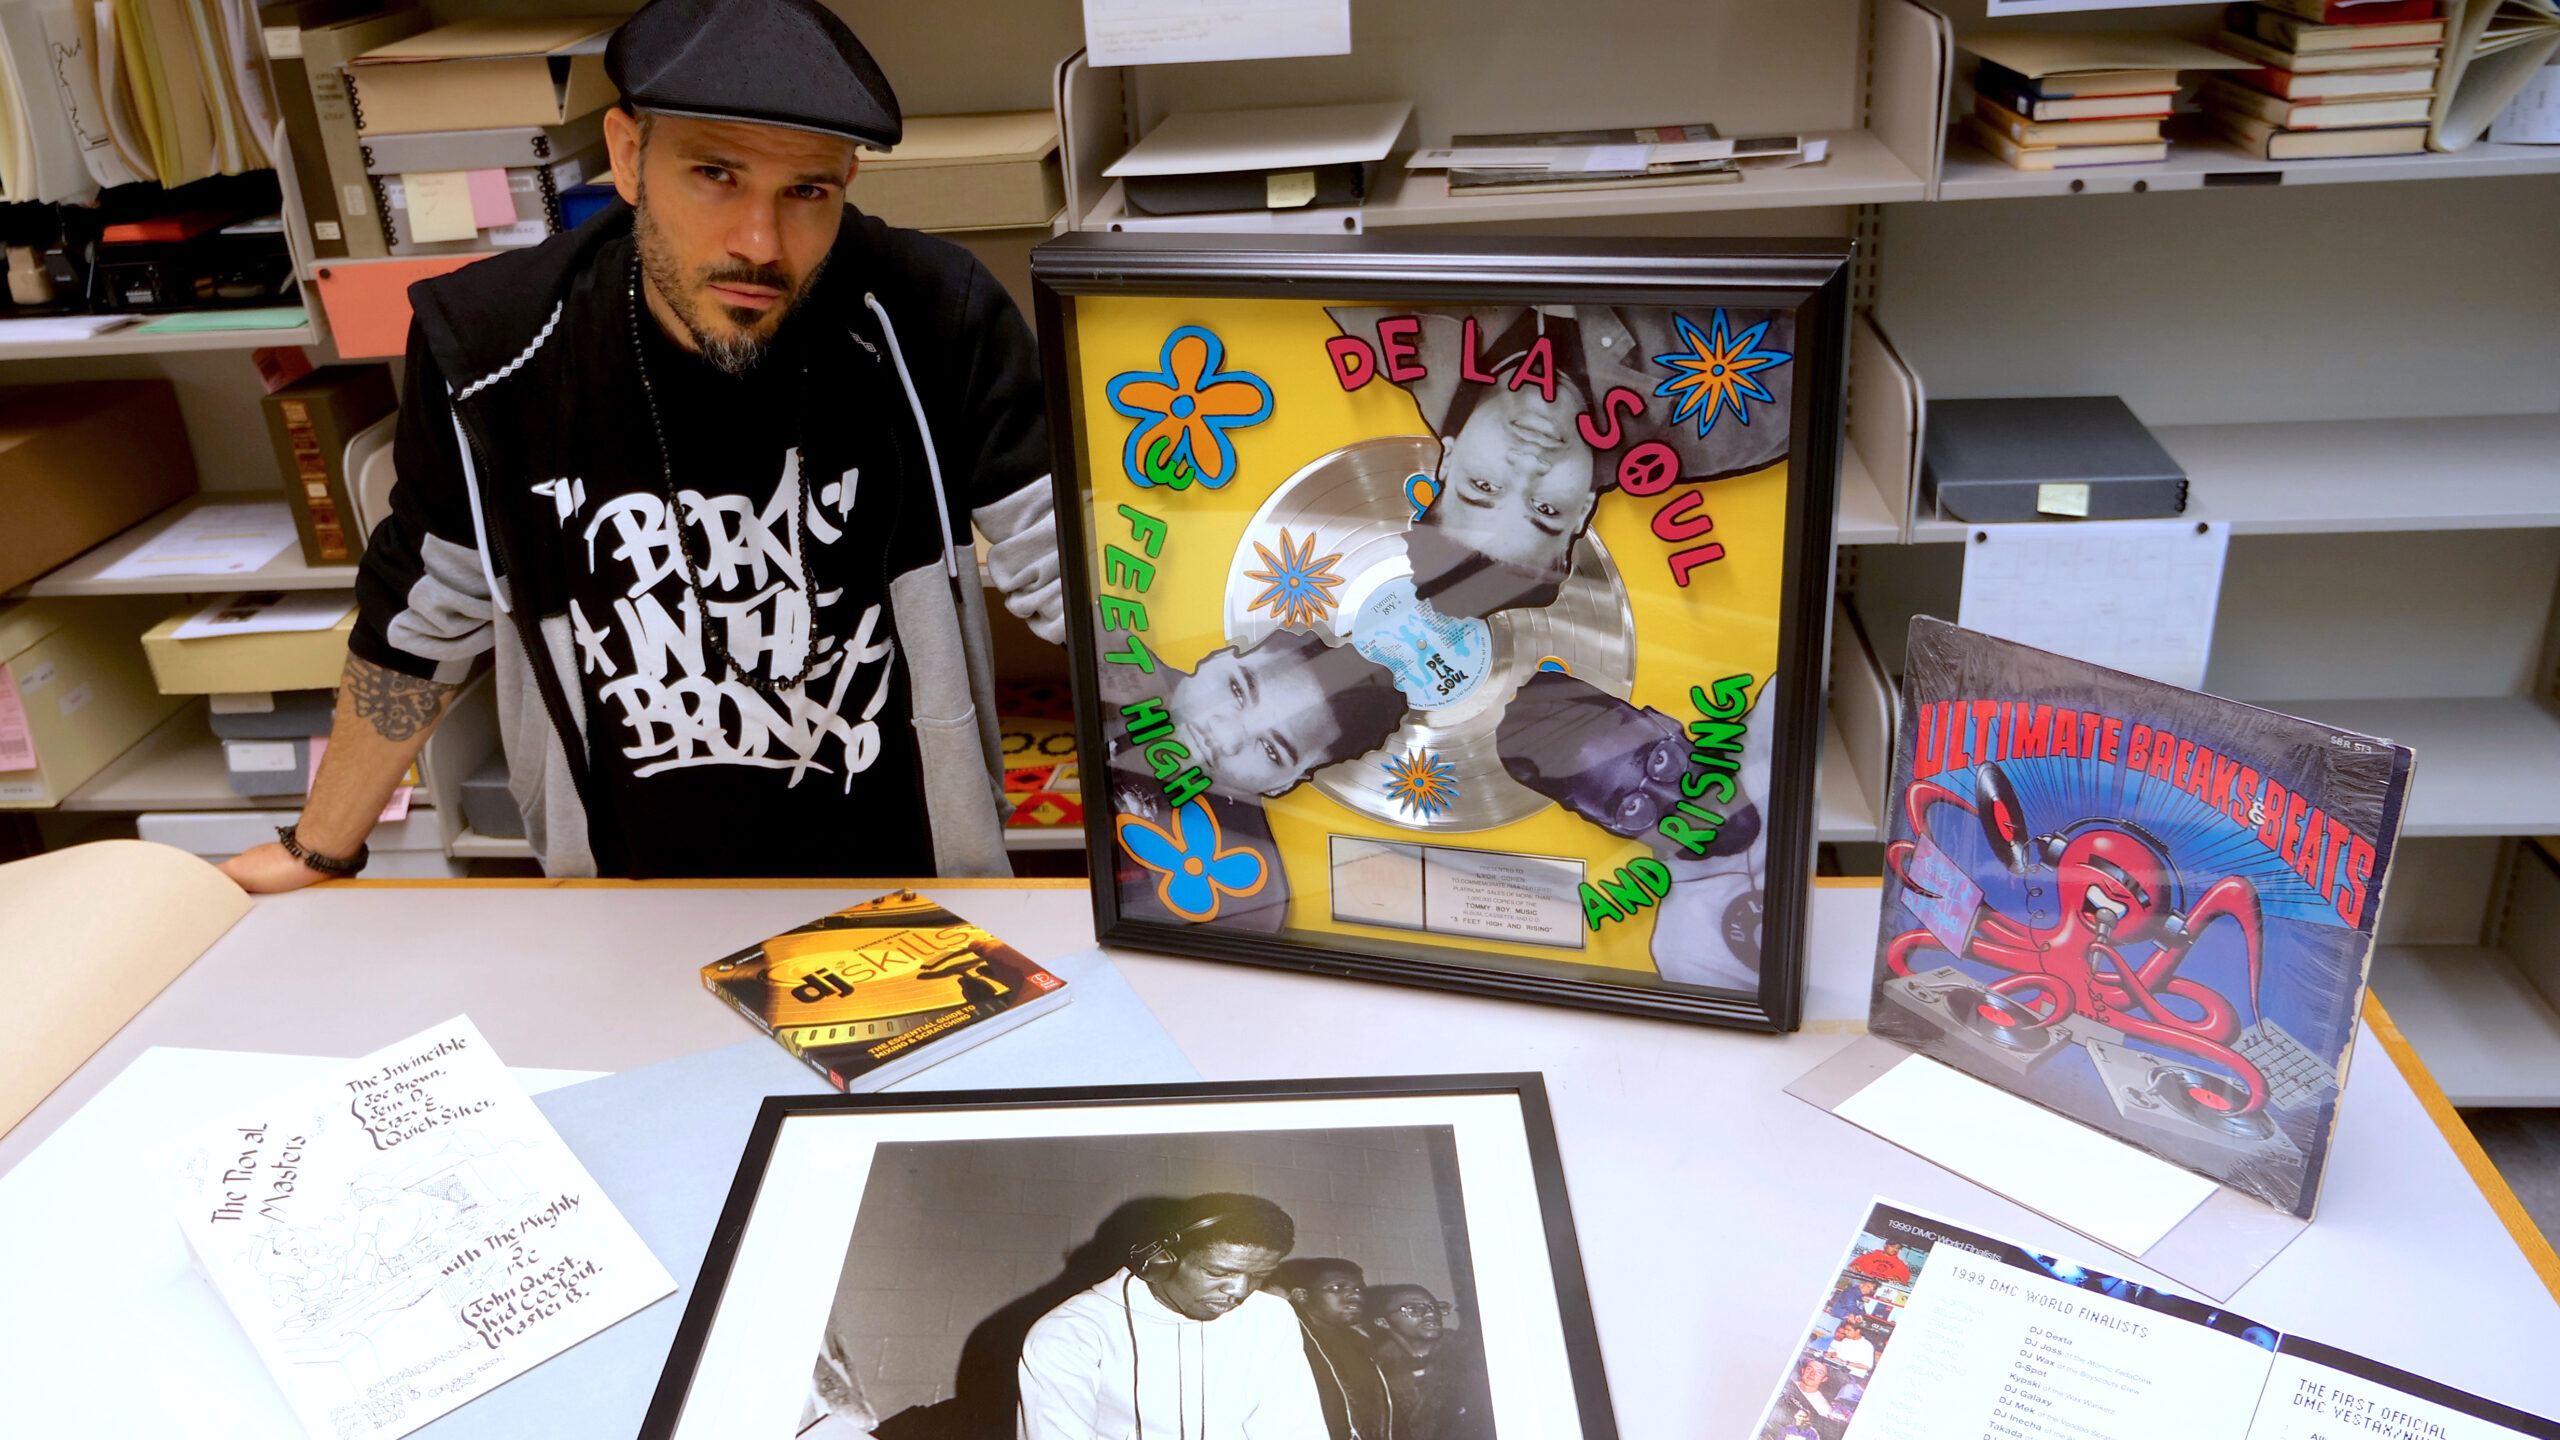 Ben Ortiz stands next to a table where different hip-hop artifacts are strewn.